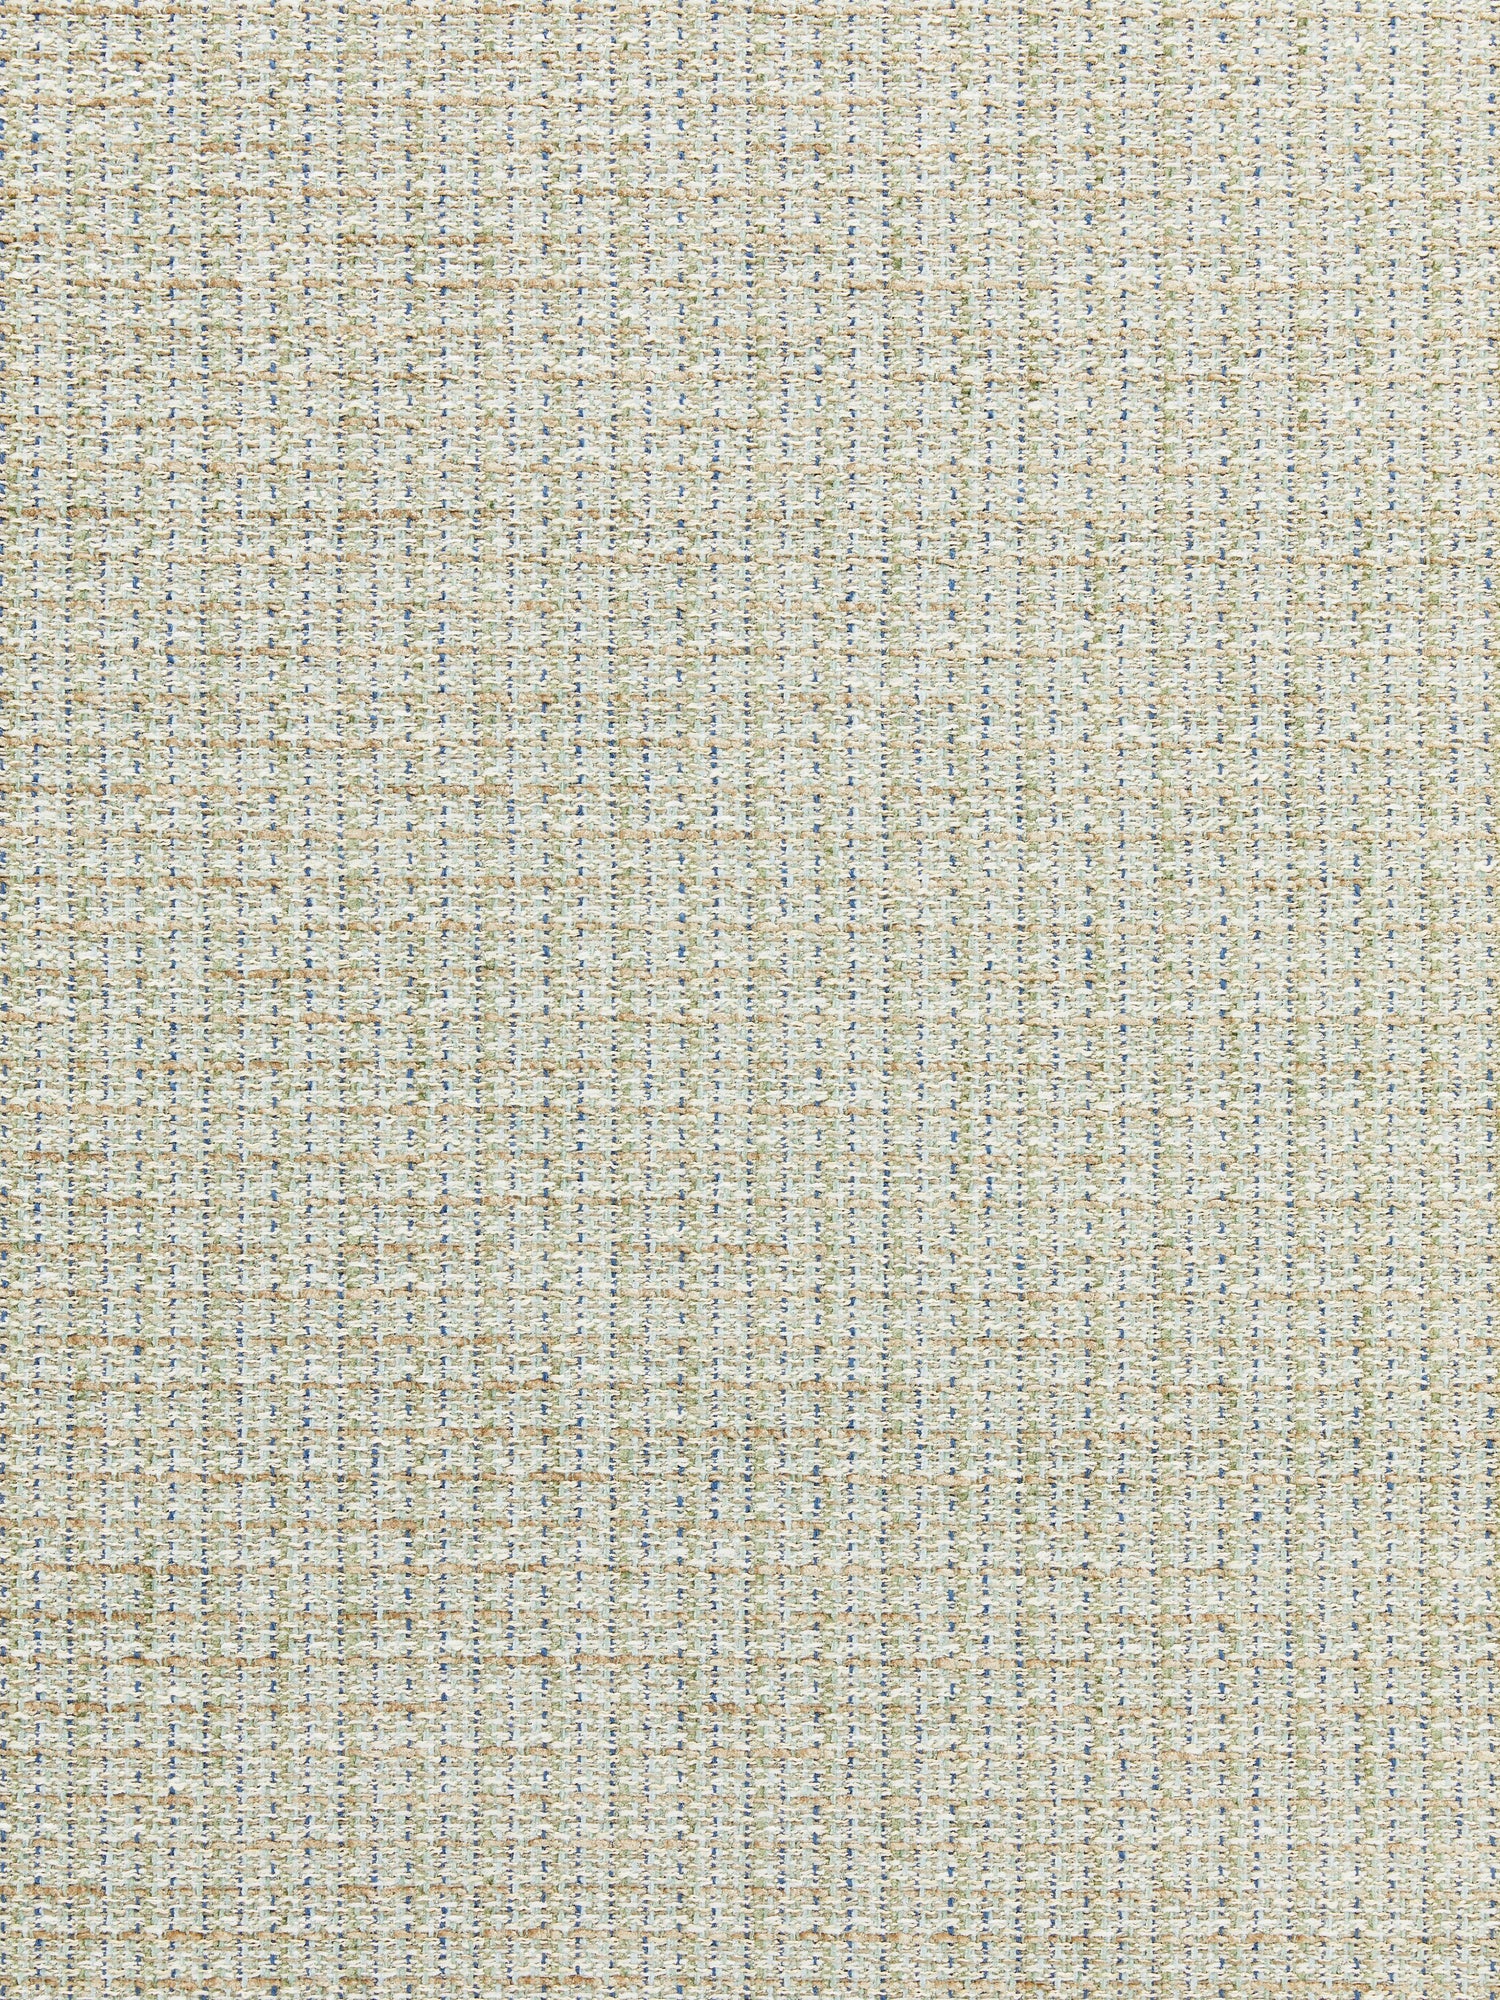 Highland Chenille fabric in seaglass color - pattern number SC 000227257 - by Scalamandre in the Scalamandre Fabrics Book 1 collection